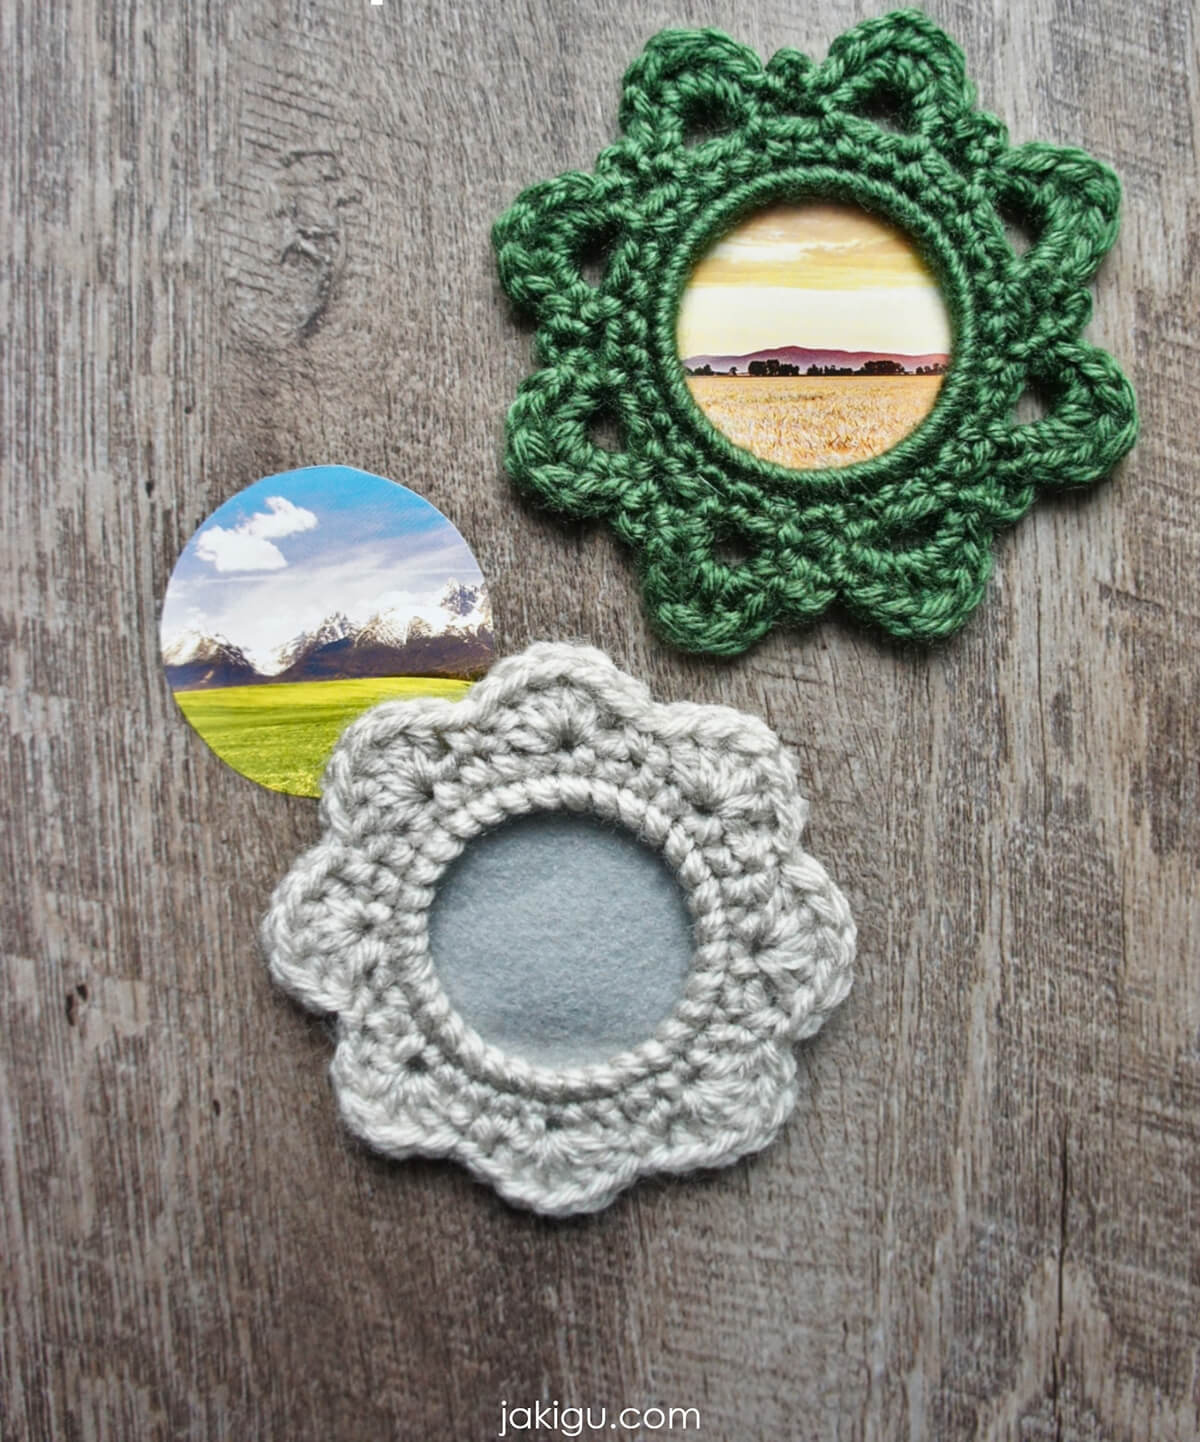 Mounting Photographs in Crochet Picture Frames